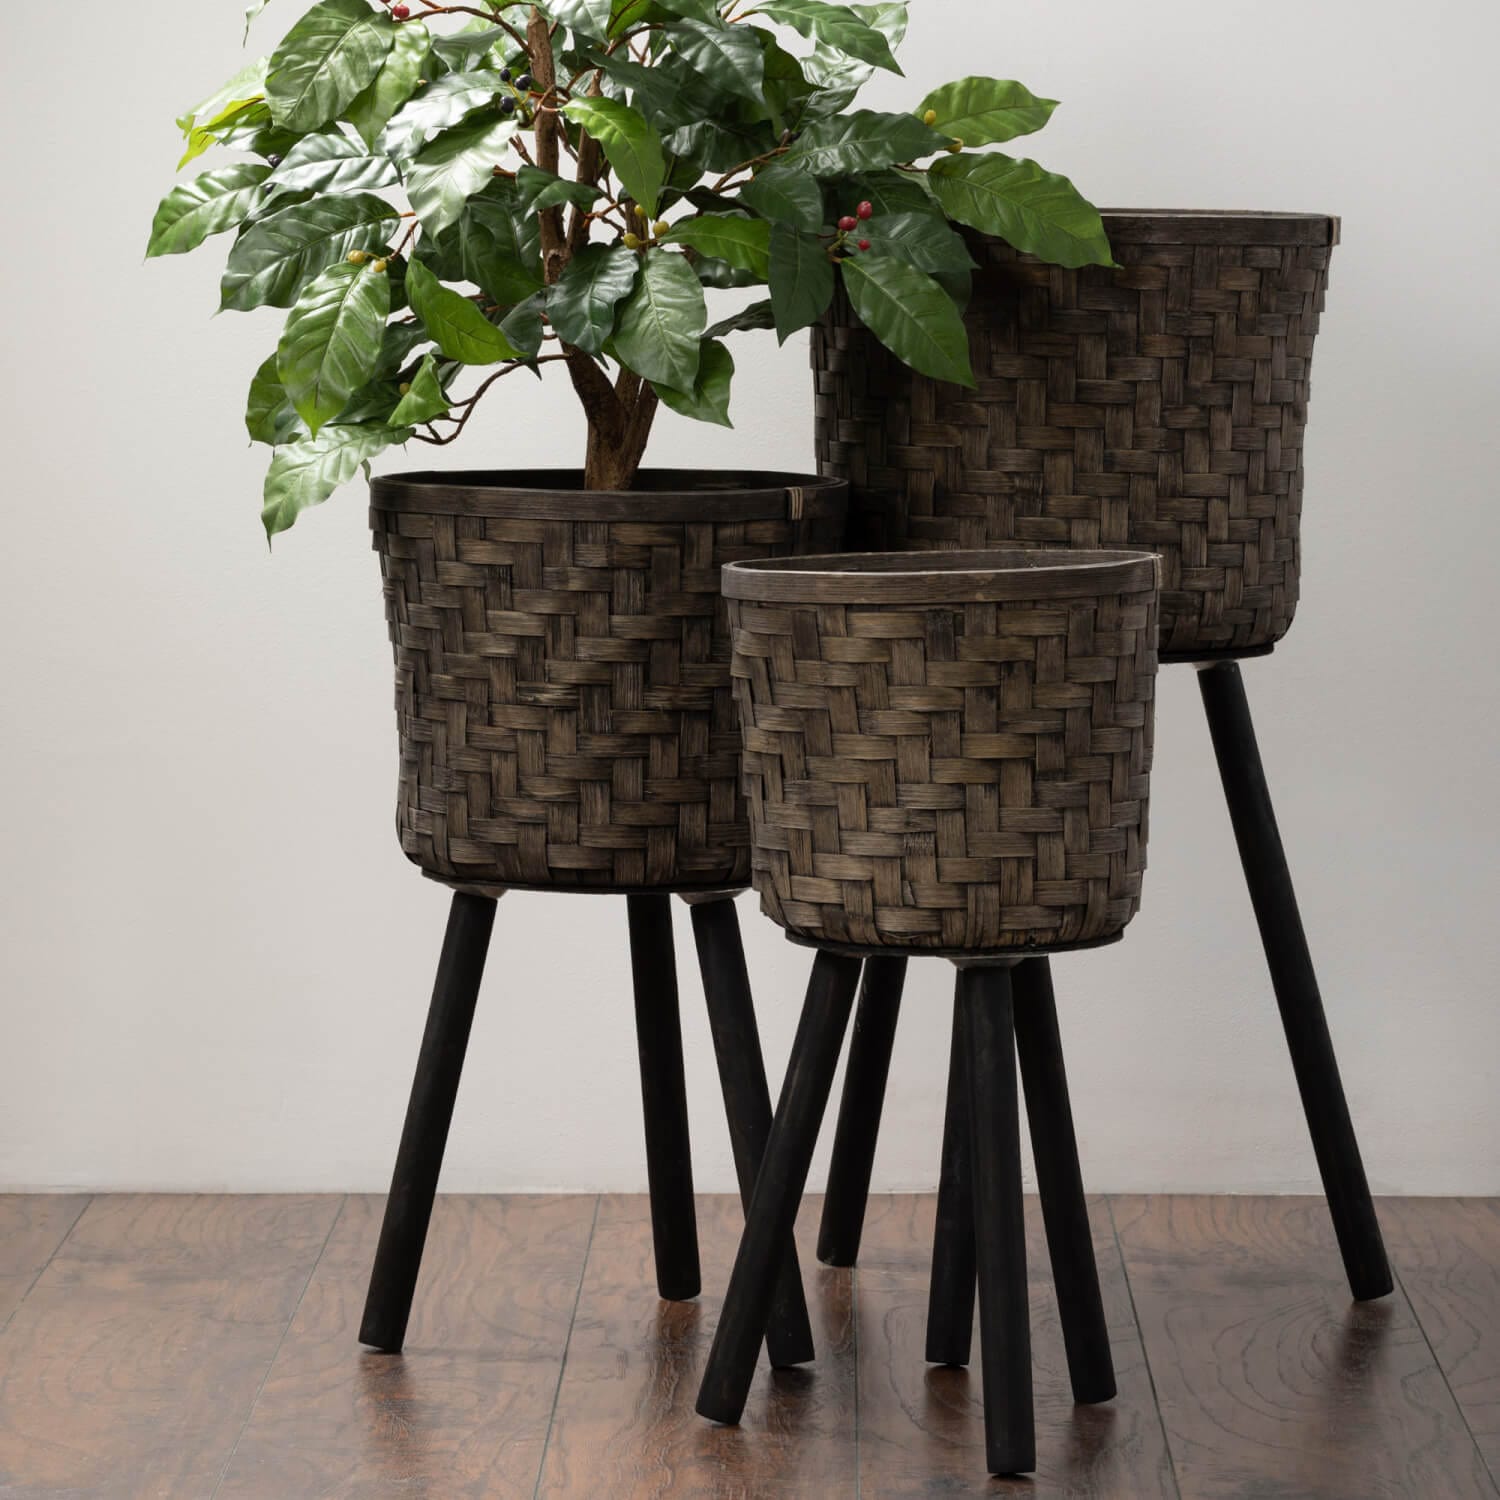 Woven Planters On Stand Set Elevate Home Decor - Pots & Planters